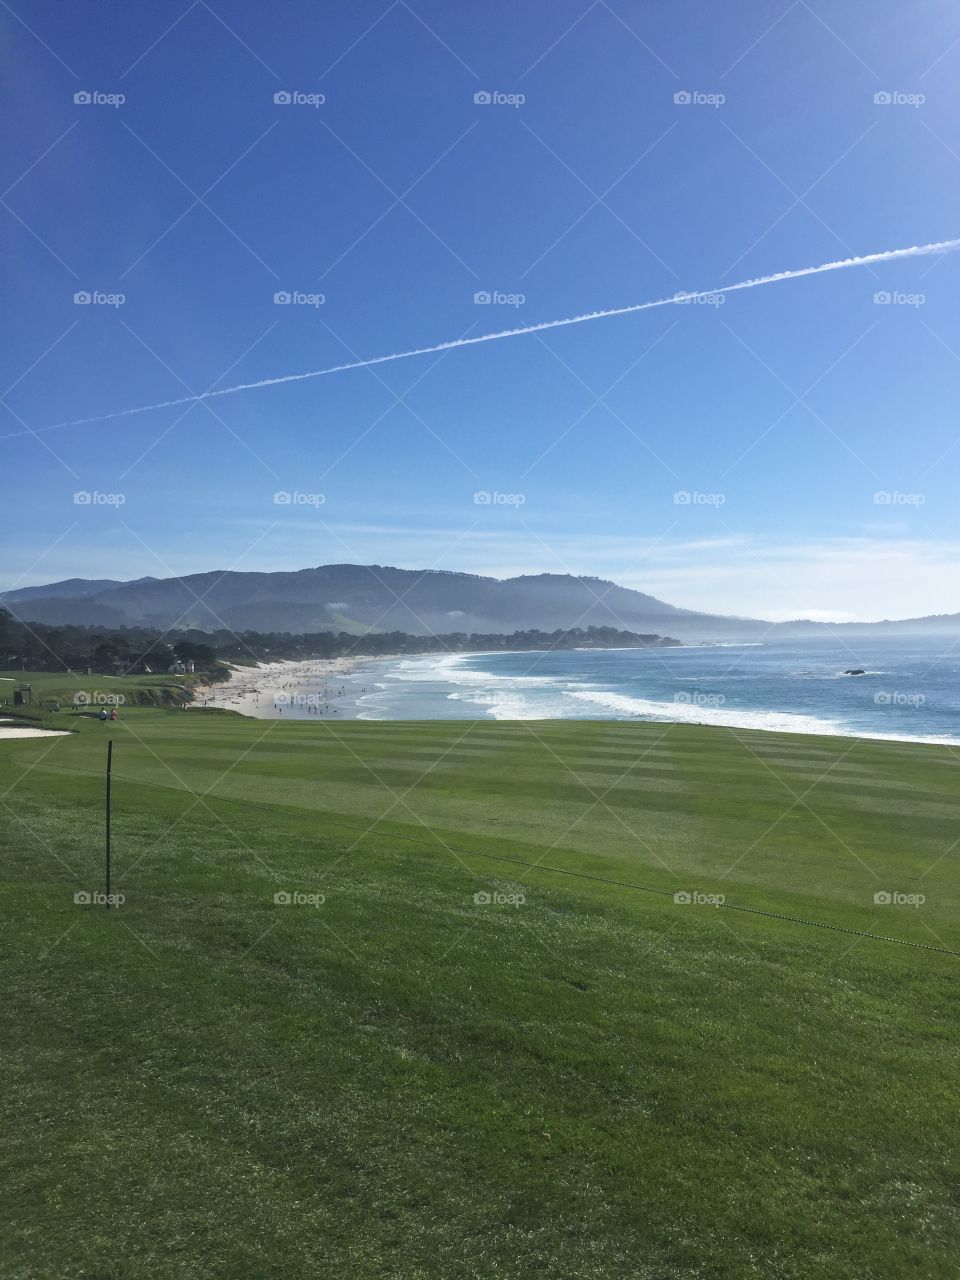 Chemtrail in California. Chemtrails over Pebble Beach Golf Course